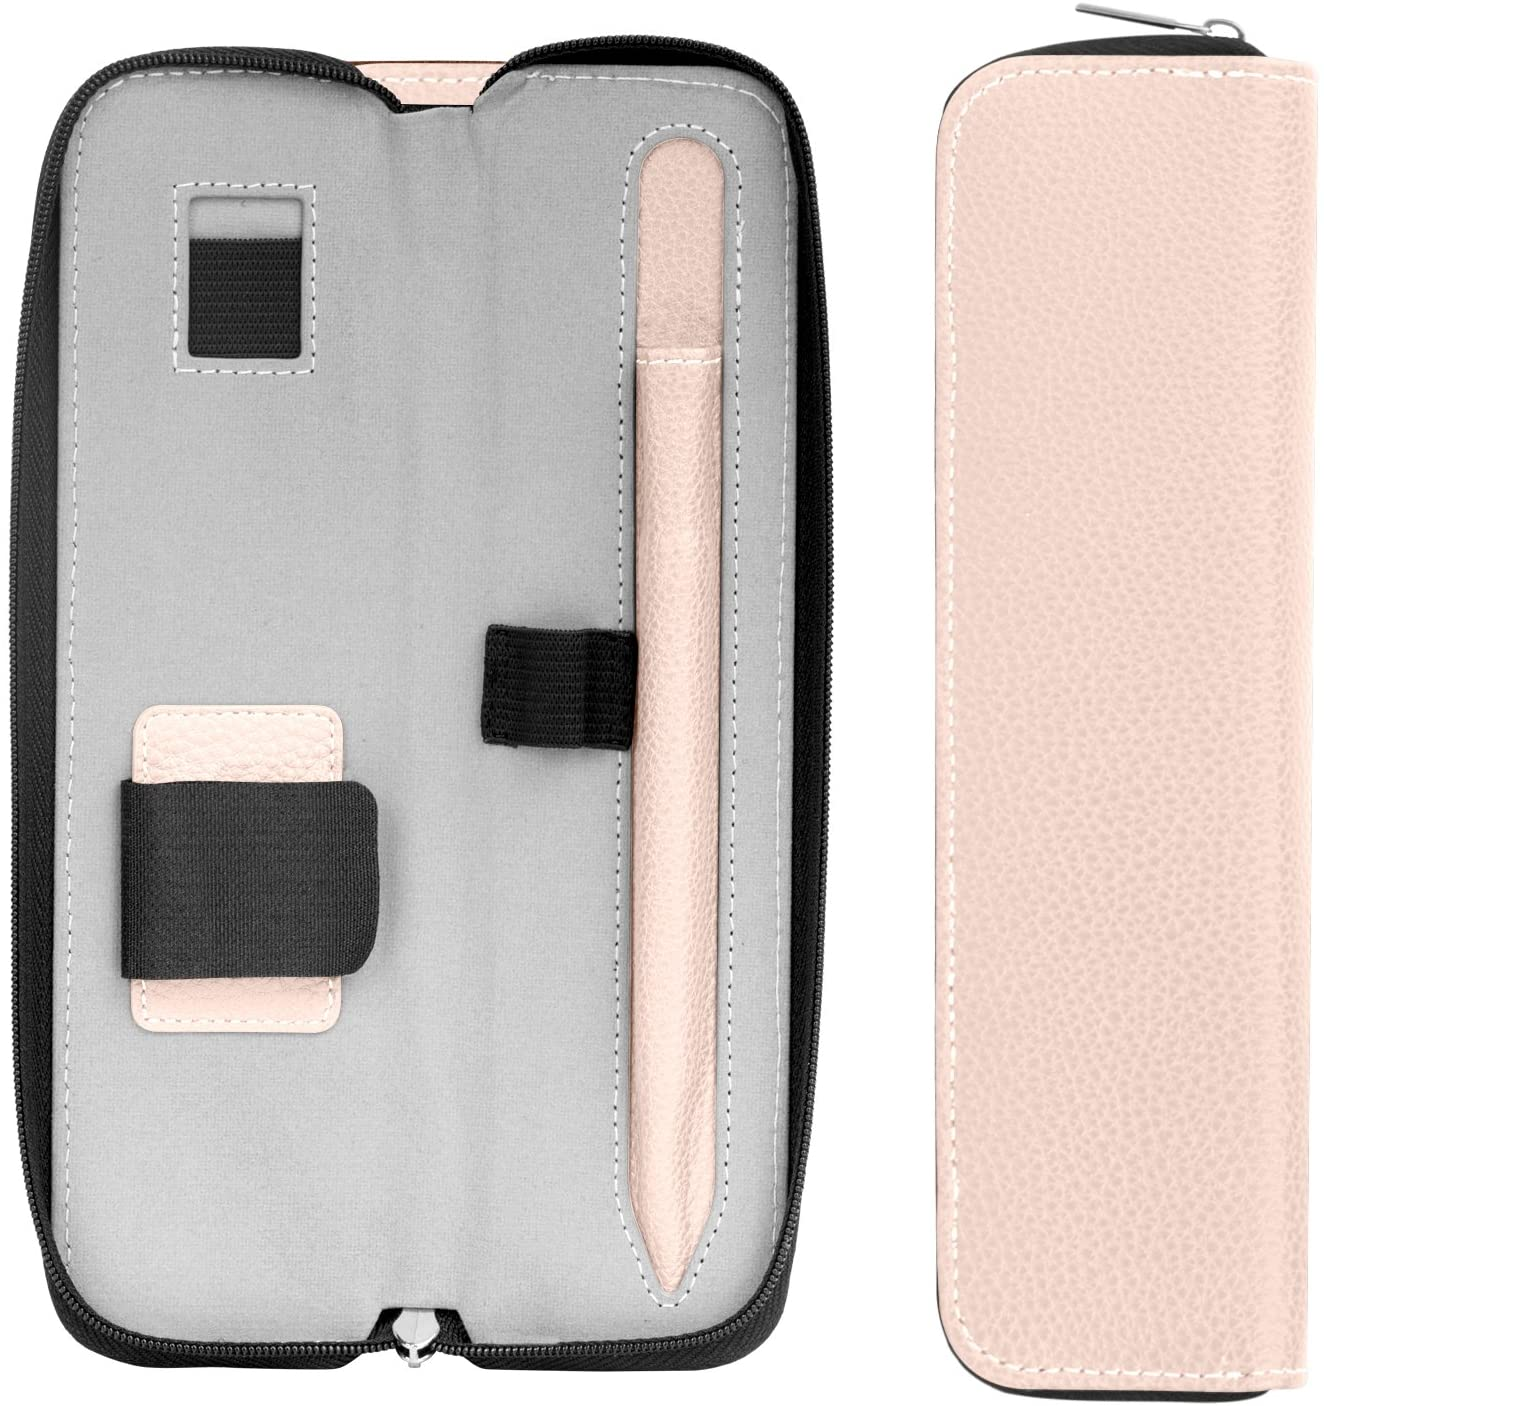 Travel Bag For iPad Pro | Best Buy Canada